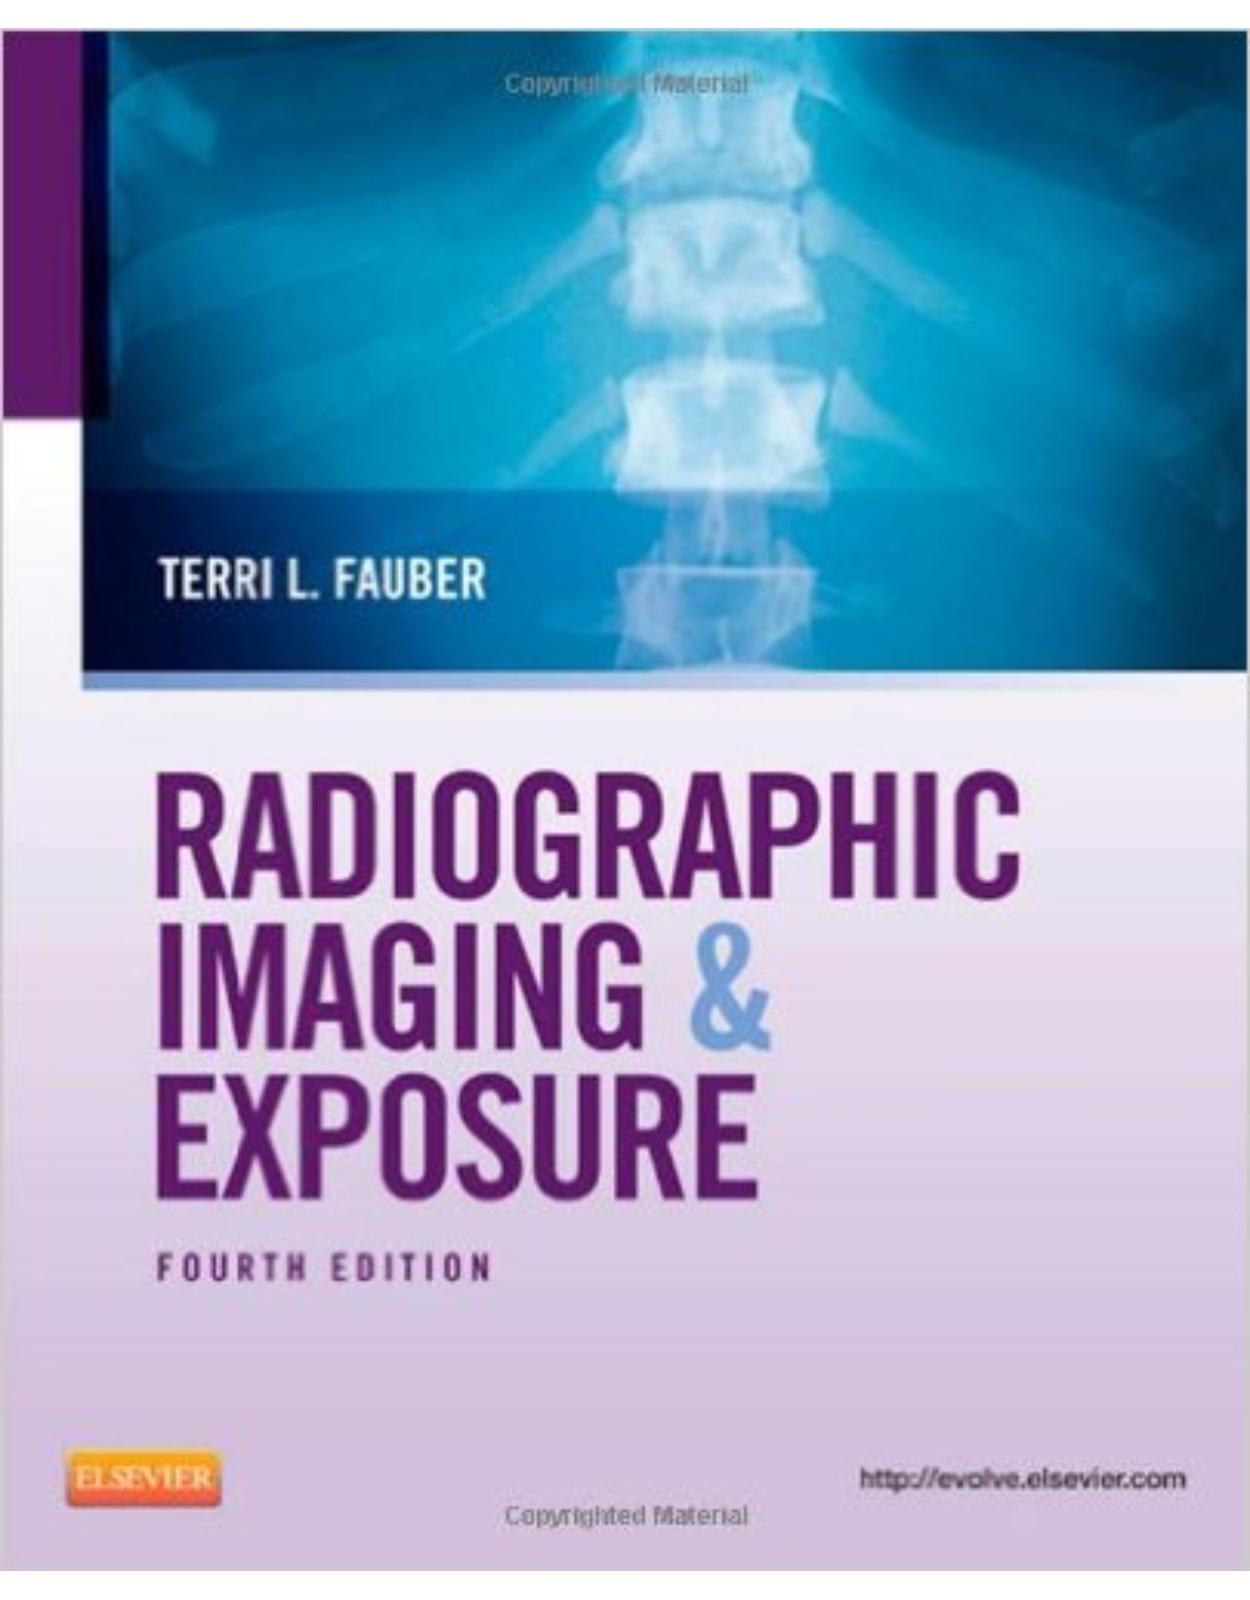 Radiographic Imaging and Exposure, 4e